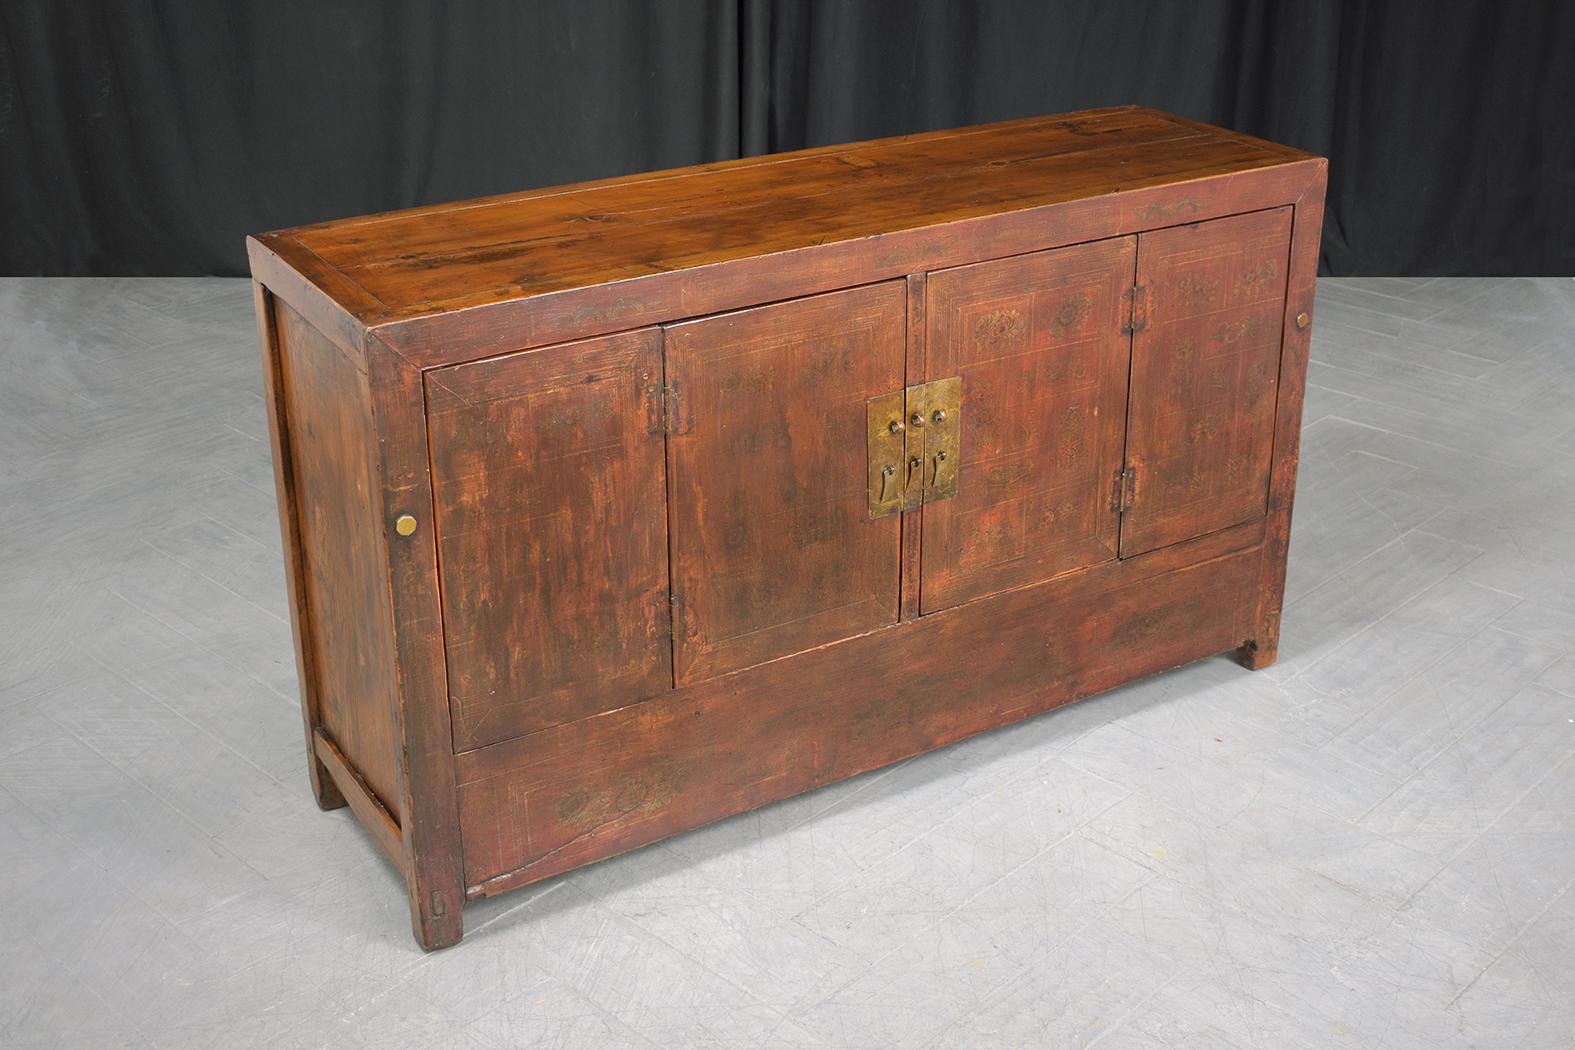 1980s Vintage Chinese Elm Wood Sideboard: Hand-Painted Floral & Brass Accents For Sale 5